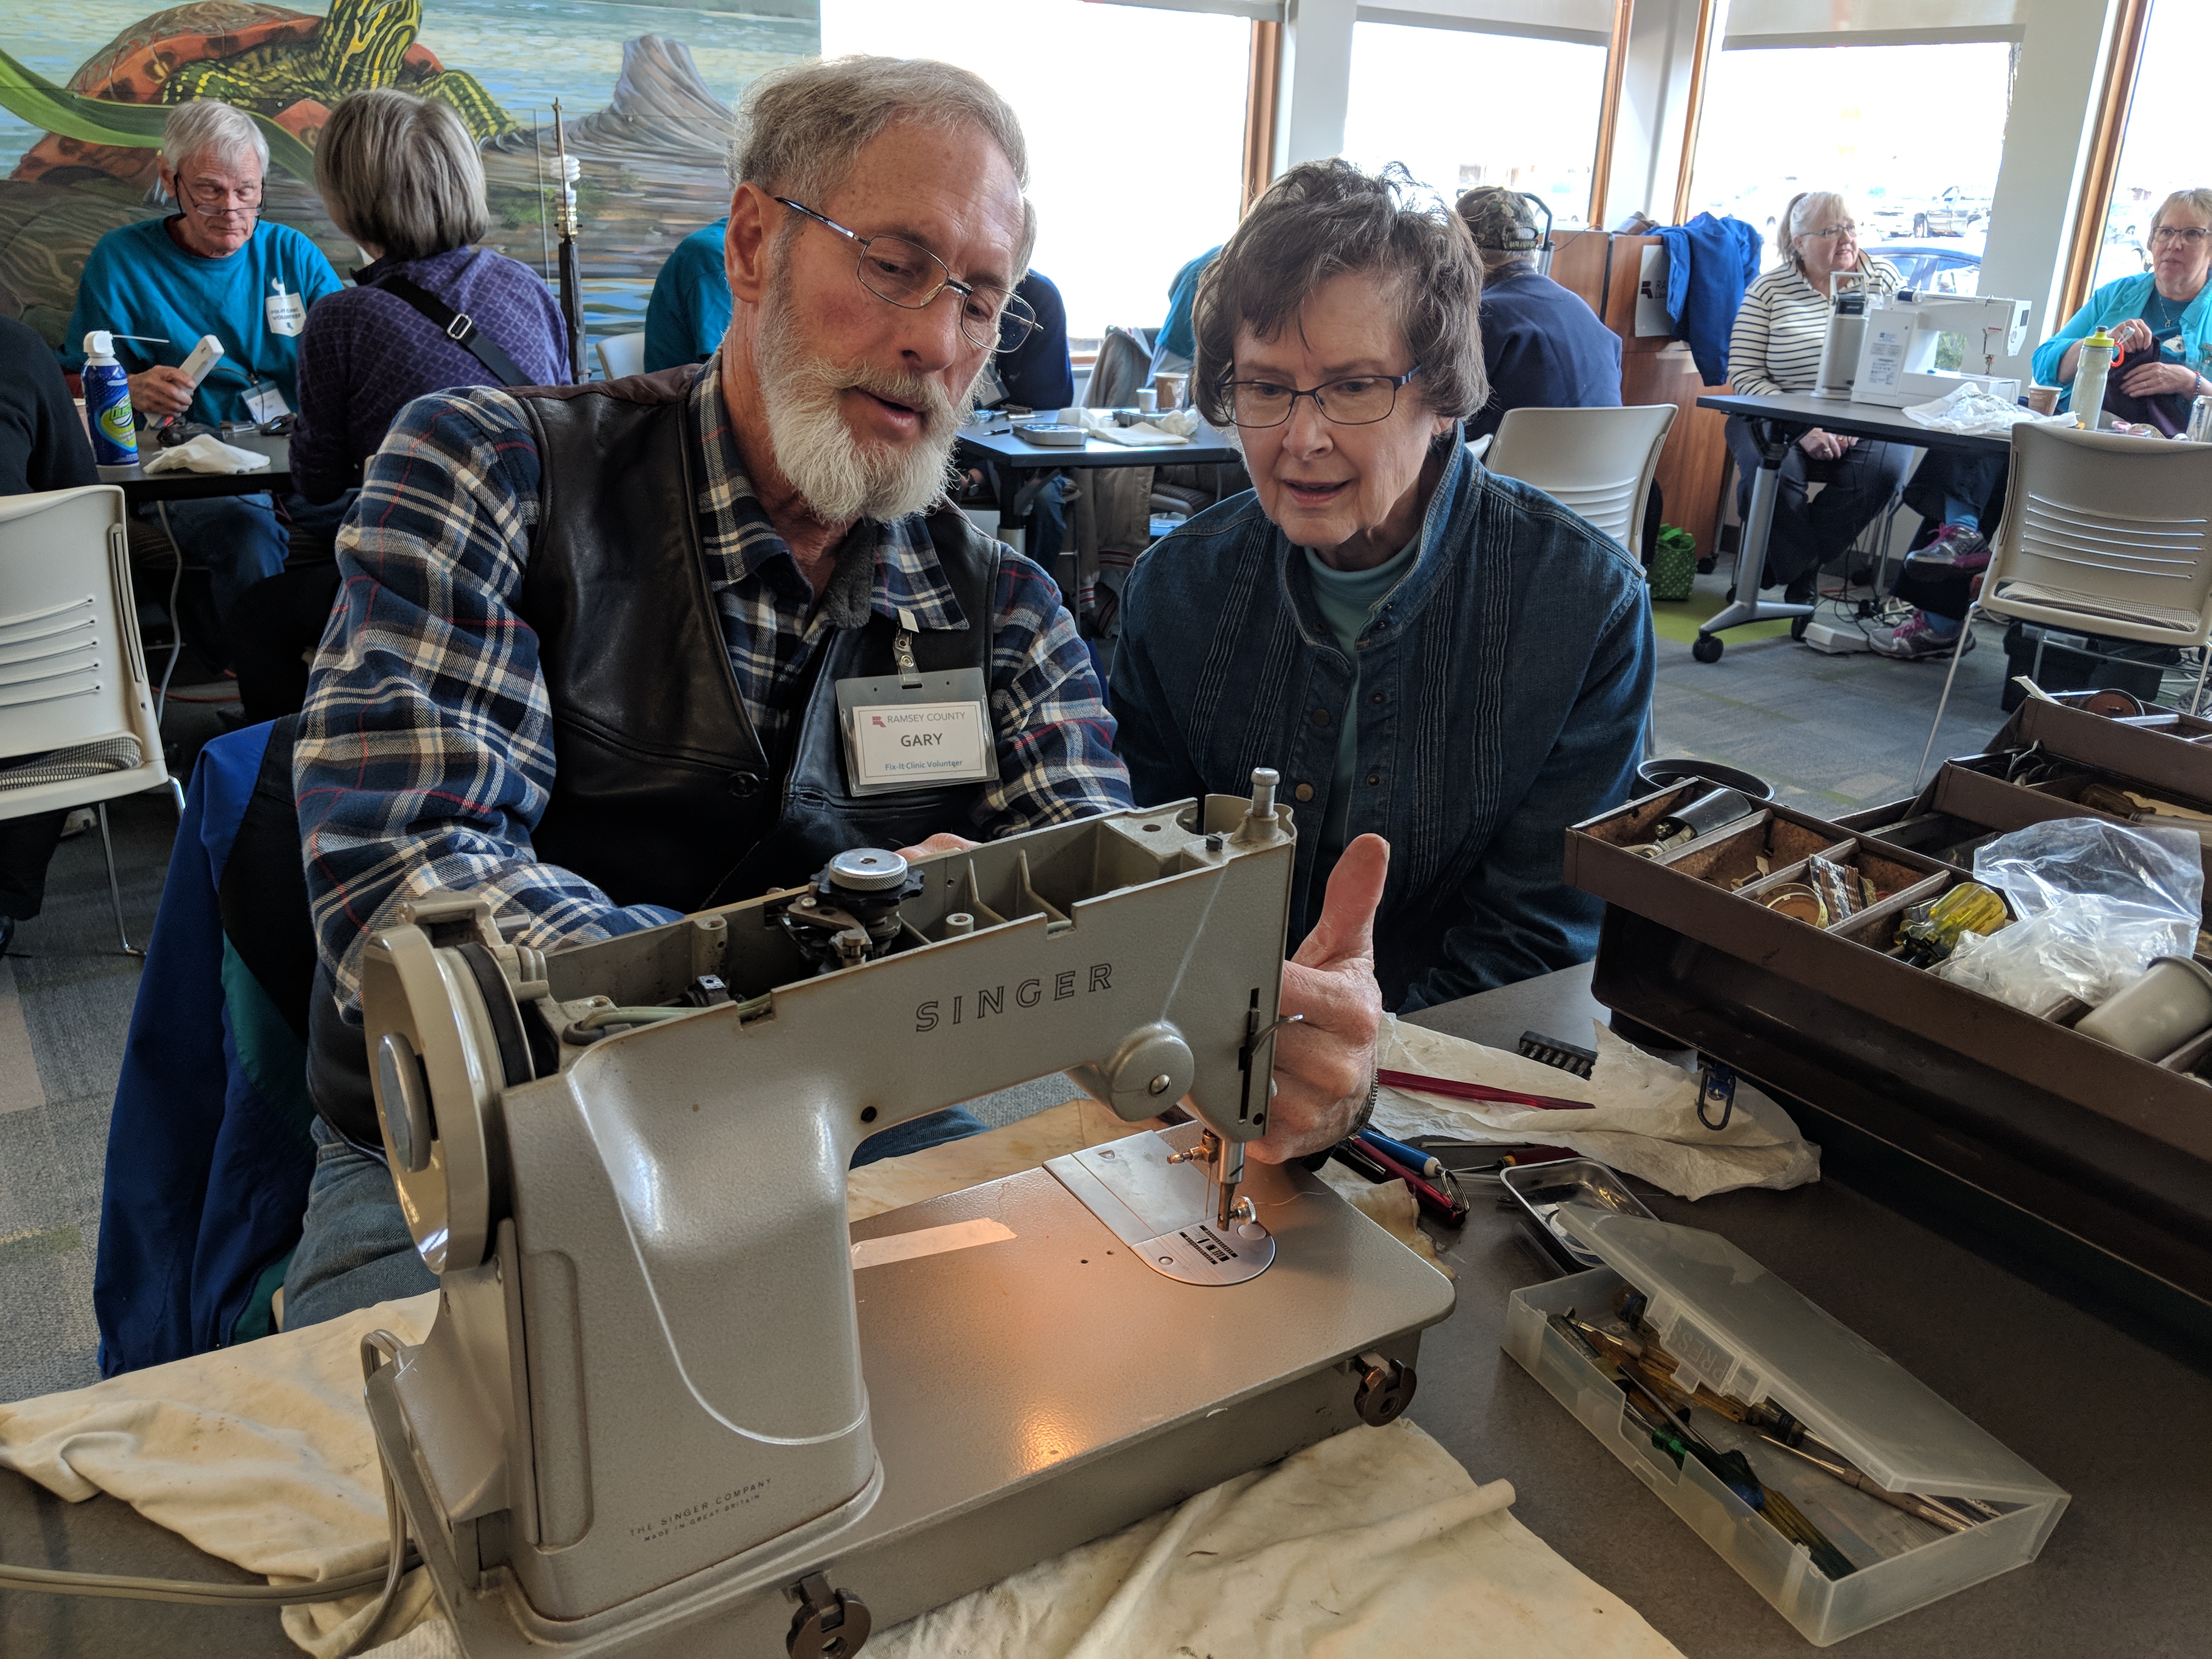 Fixer helps a resident fix their sewing machine